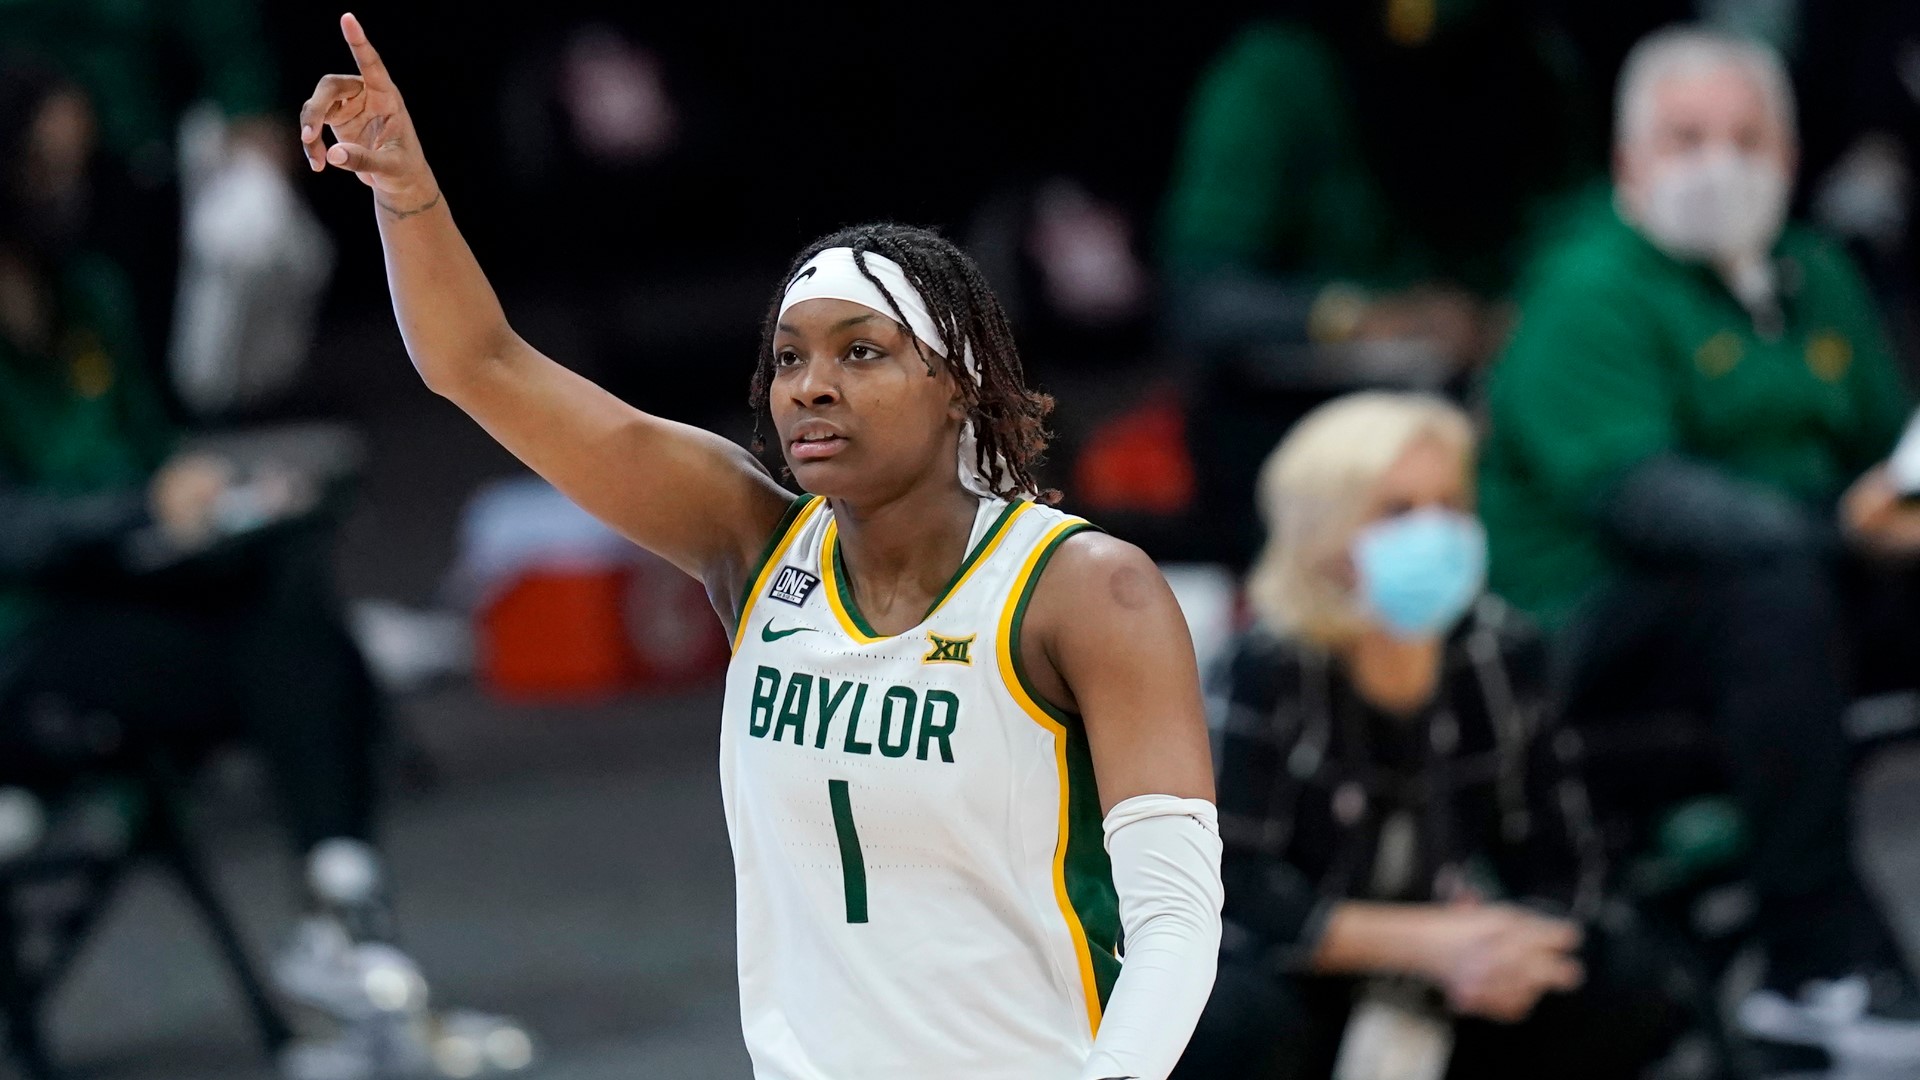 Baylor star NaLyssa Smith was born and raised in San Antonio, the site of the entire NCAA women’s tournament.